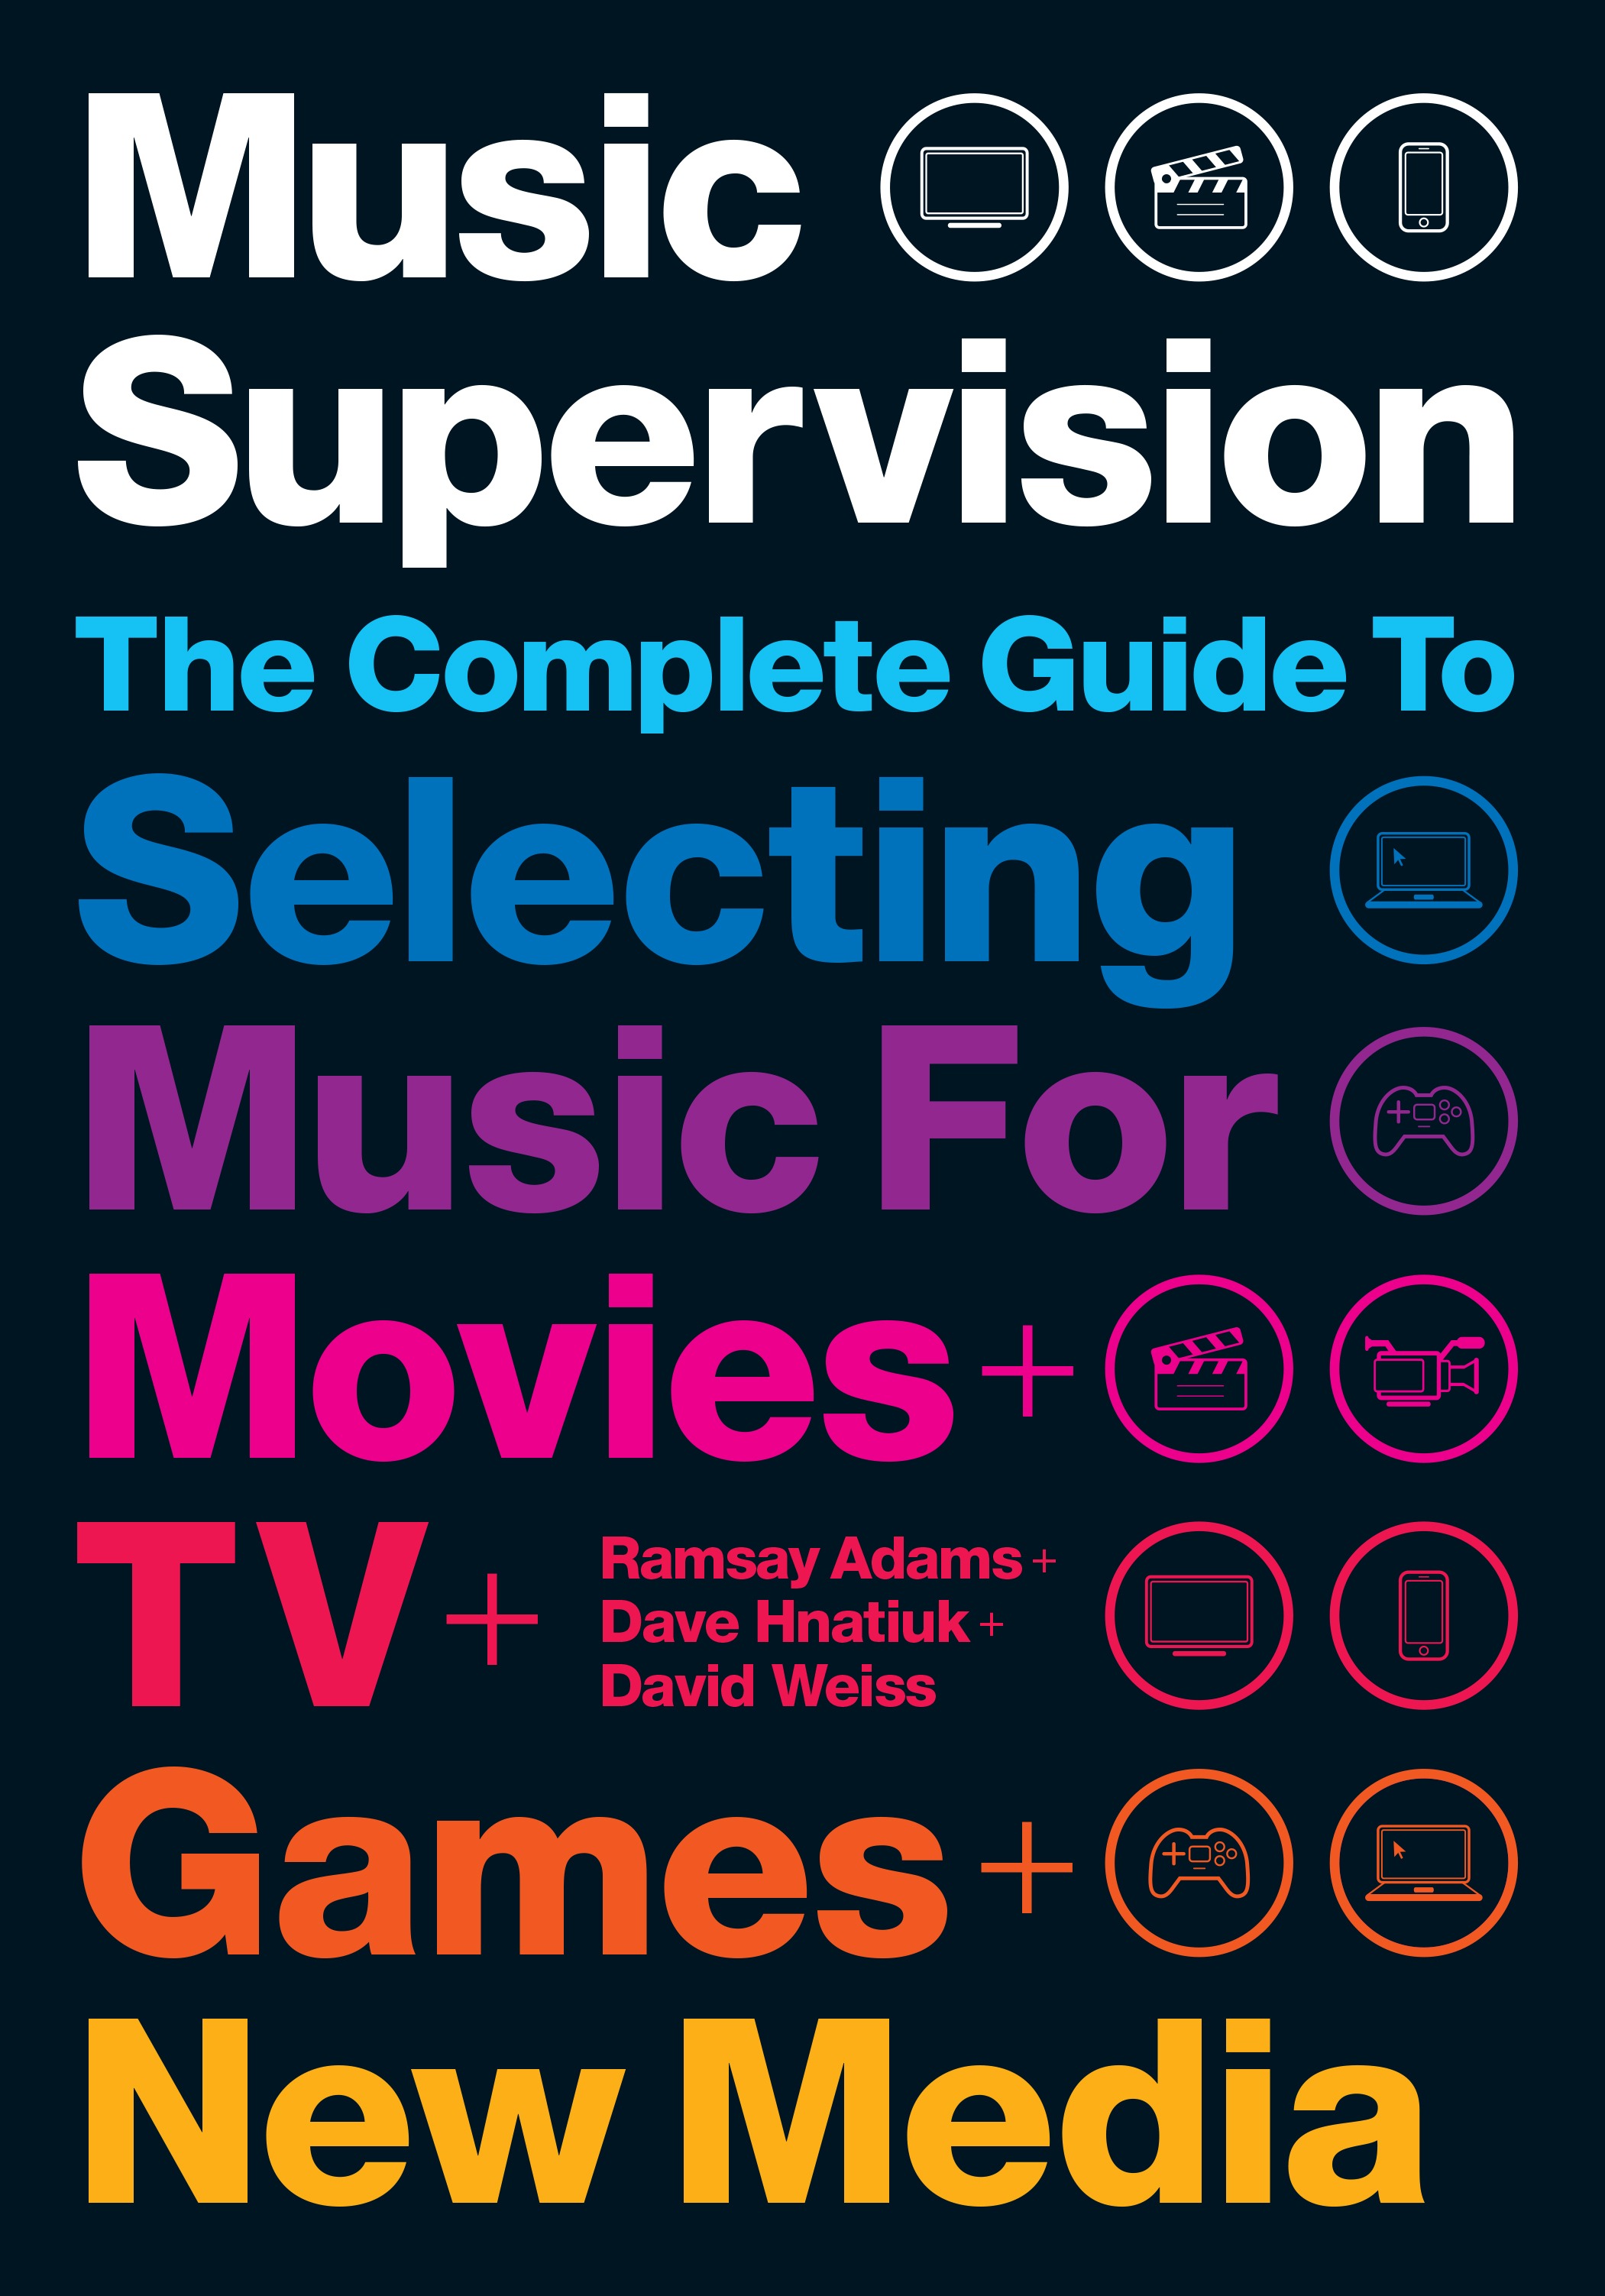 Music Supervision 2: The Complete Guide to Selecting Music for Movies, TV, Games, & New Media.